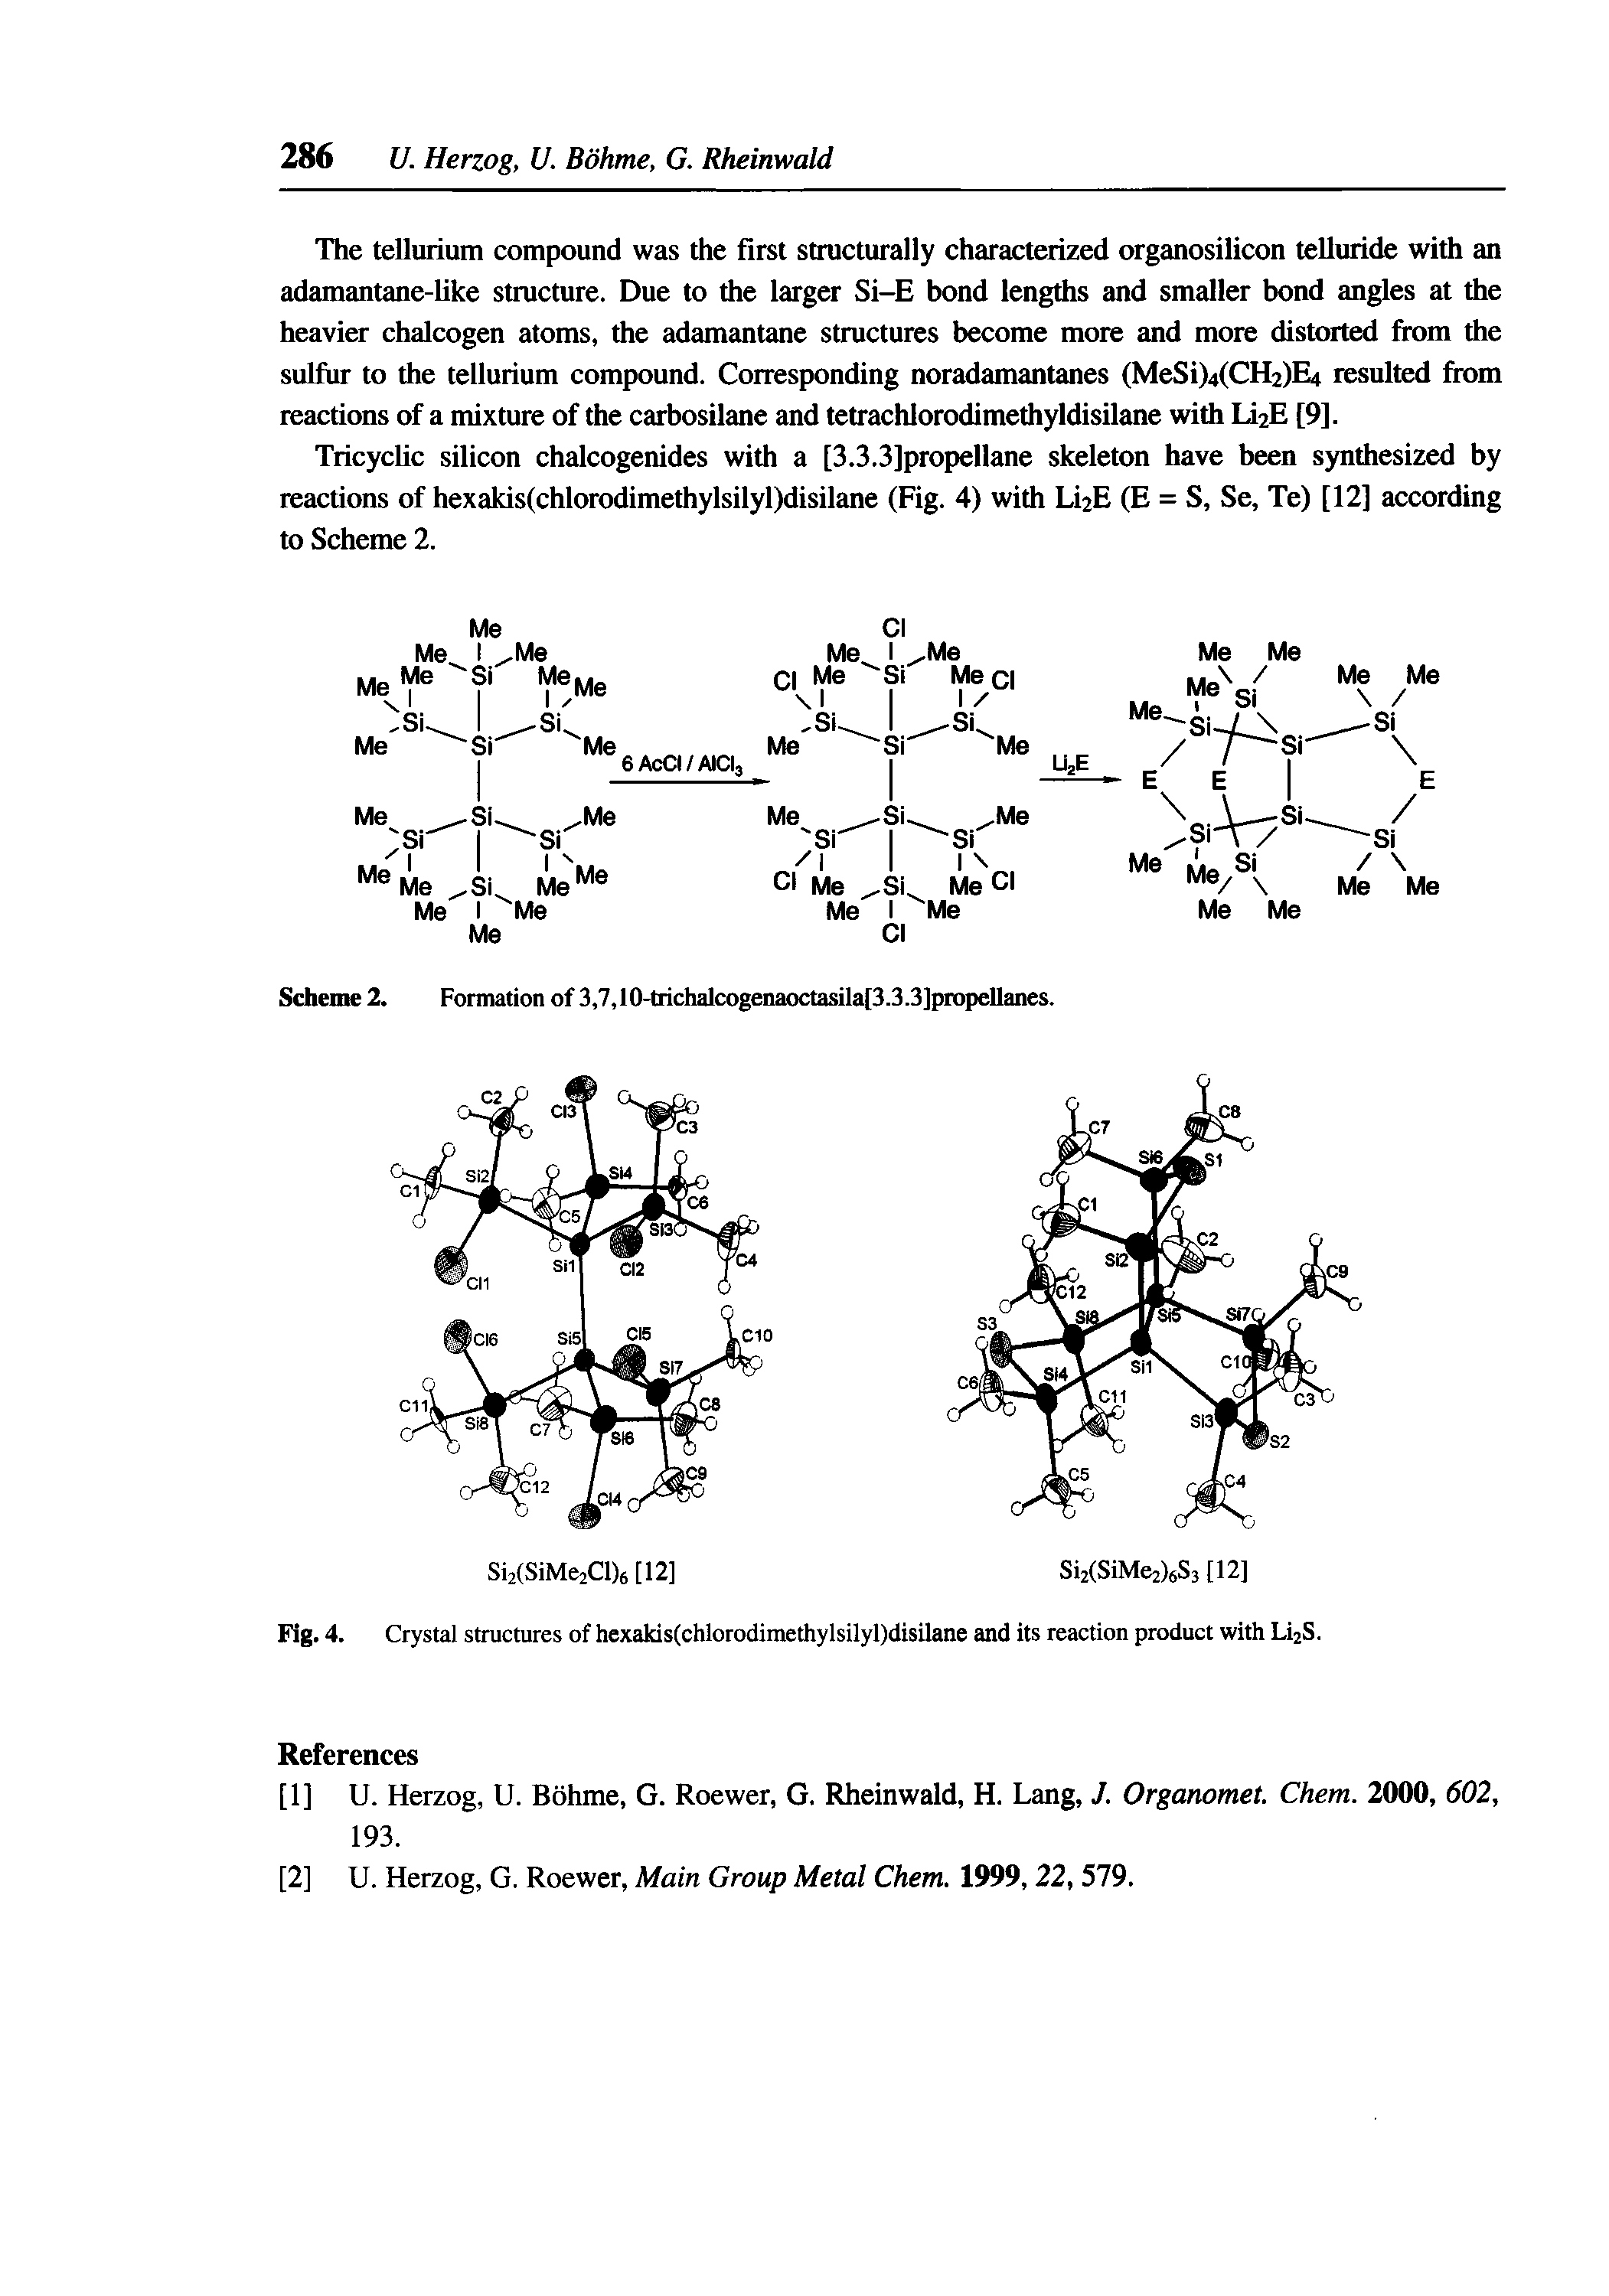 Fig. 4. Crystal structures of hexakis(chlorodimethylsilyl)disilane and its reaction product with li2S.